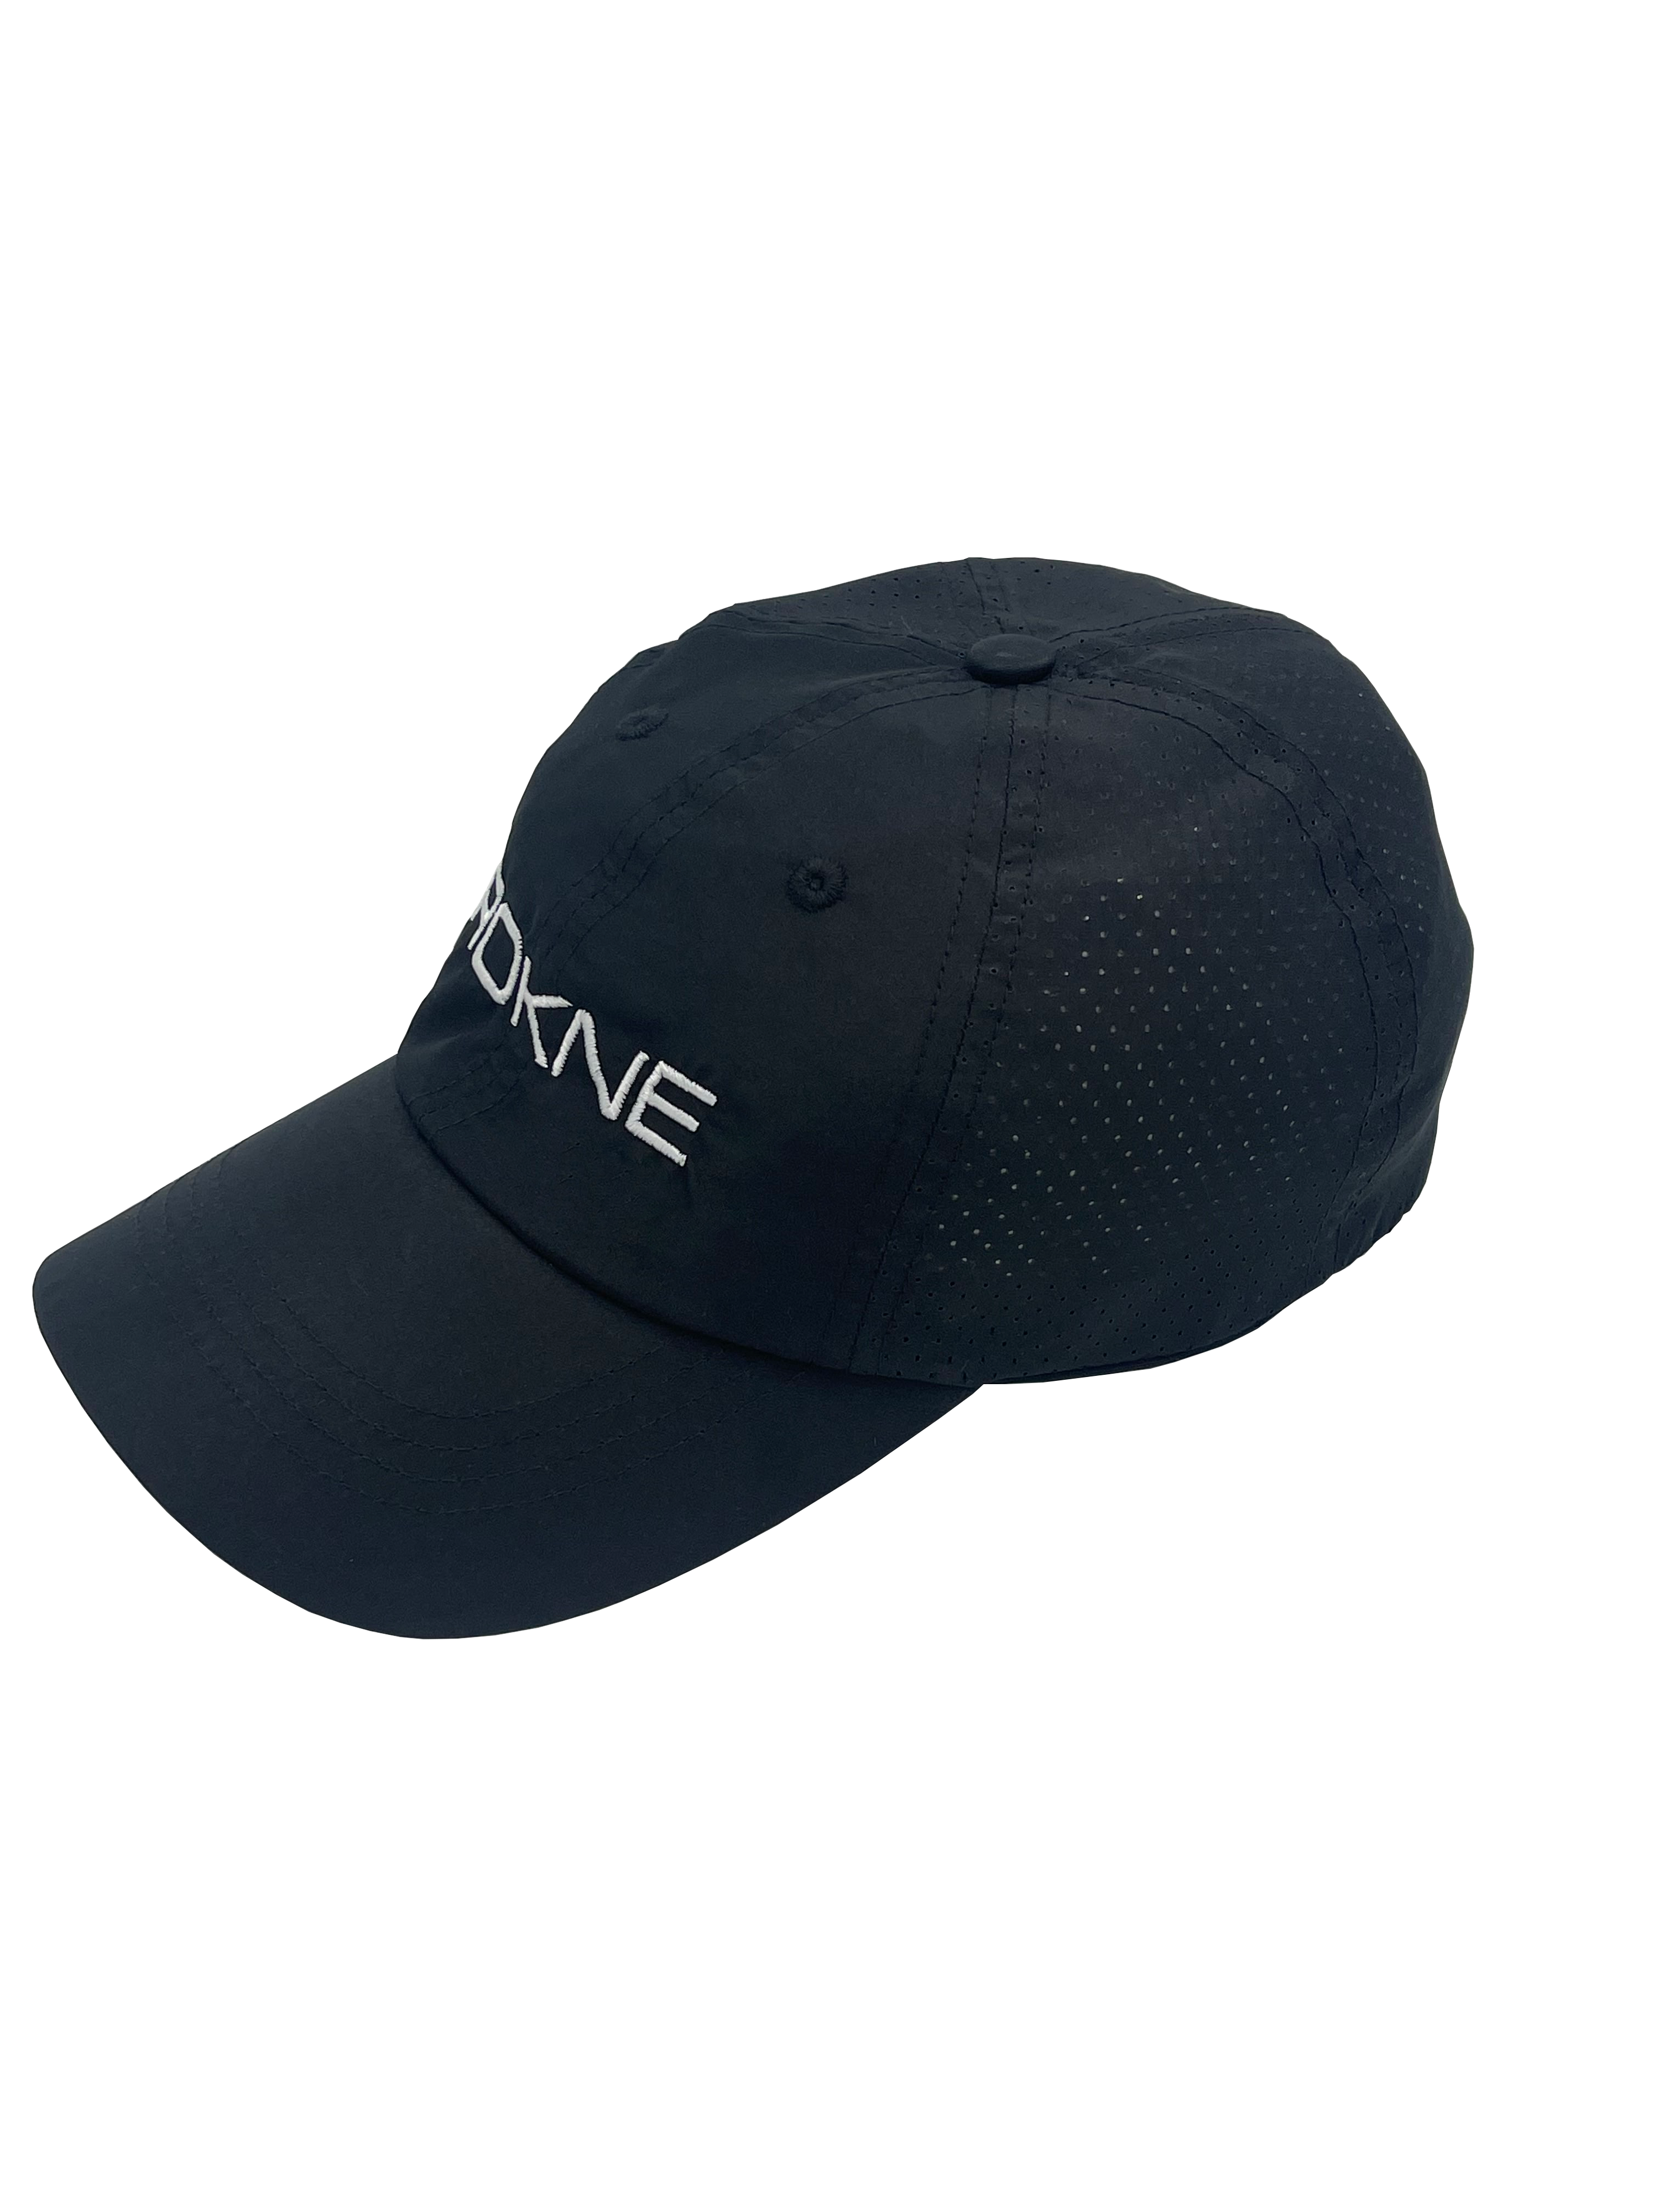 STAY COOL PERFORMANCE HAT